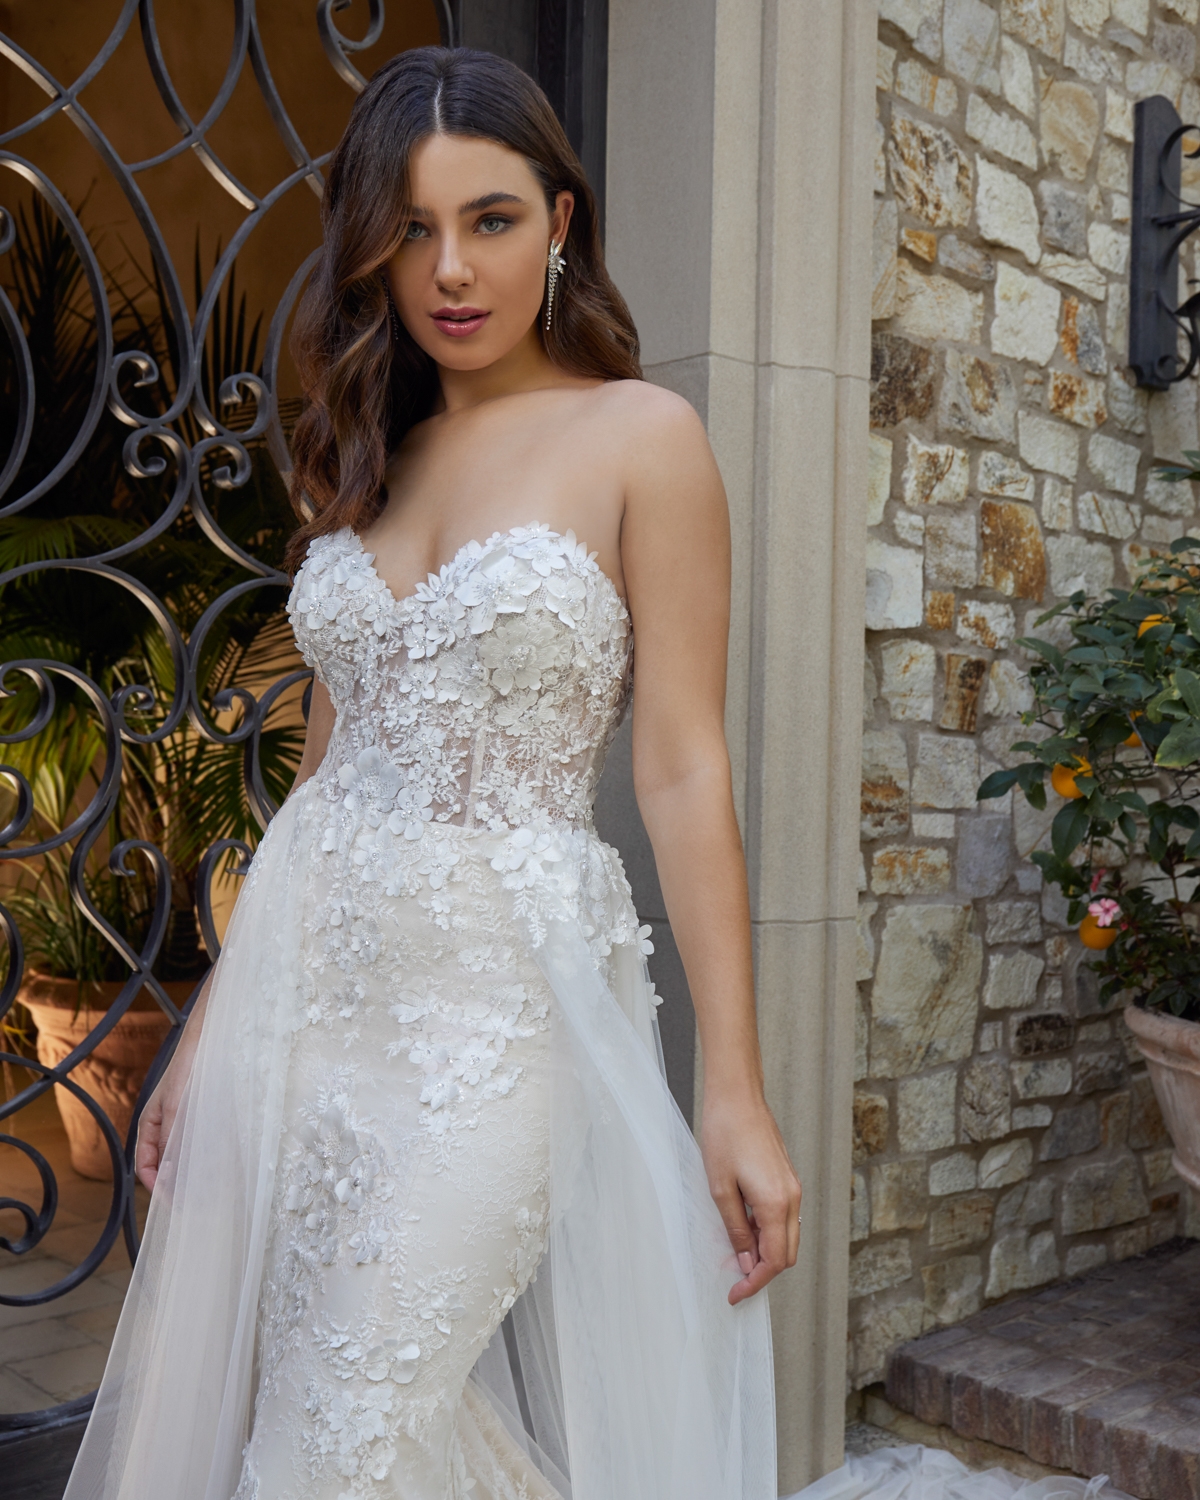 Style 2444 Rebekah, Strapless 3D Floral Lace Fit and Flare Wedding Dress  with Removable Skirt by Casablanca Bridal